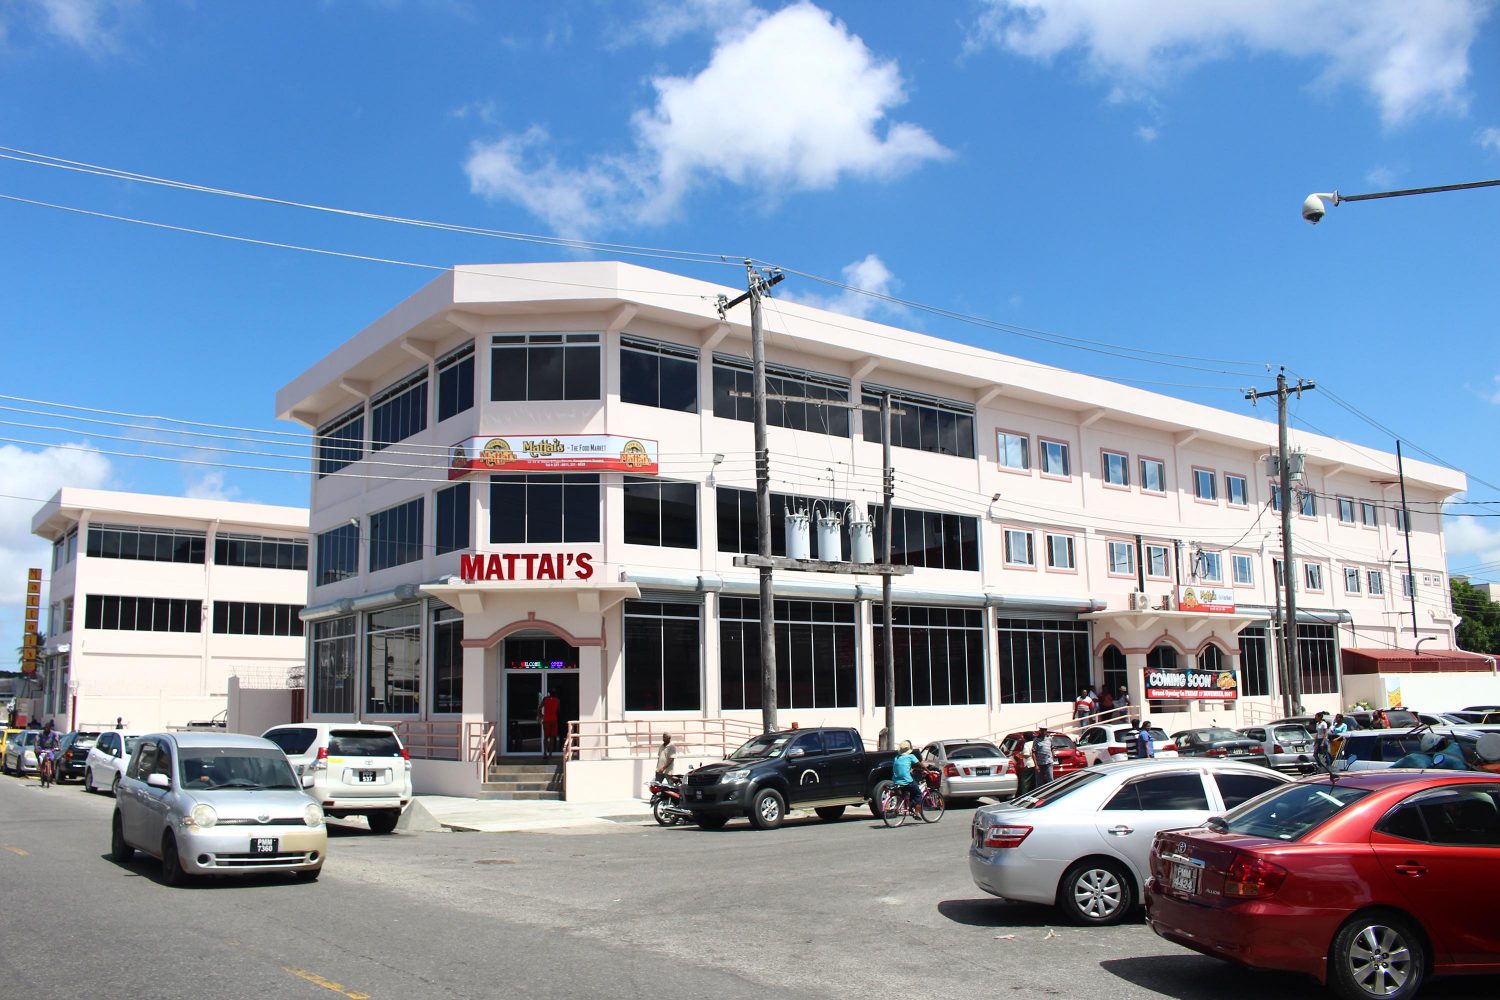 The Mattai’s Food Market building located at the corner of Water and Hope Streets, Georgetown.
